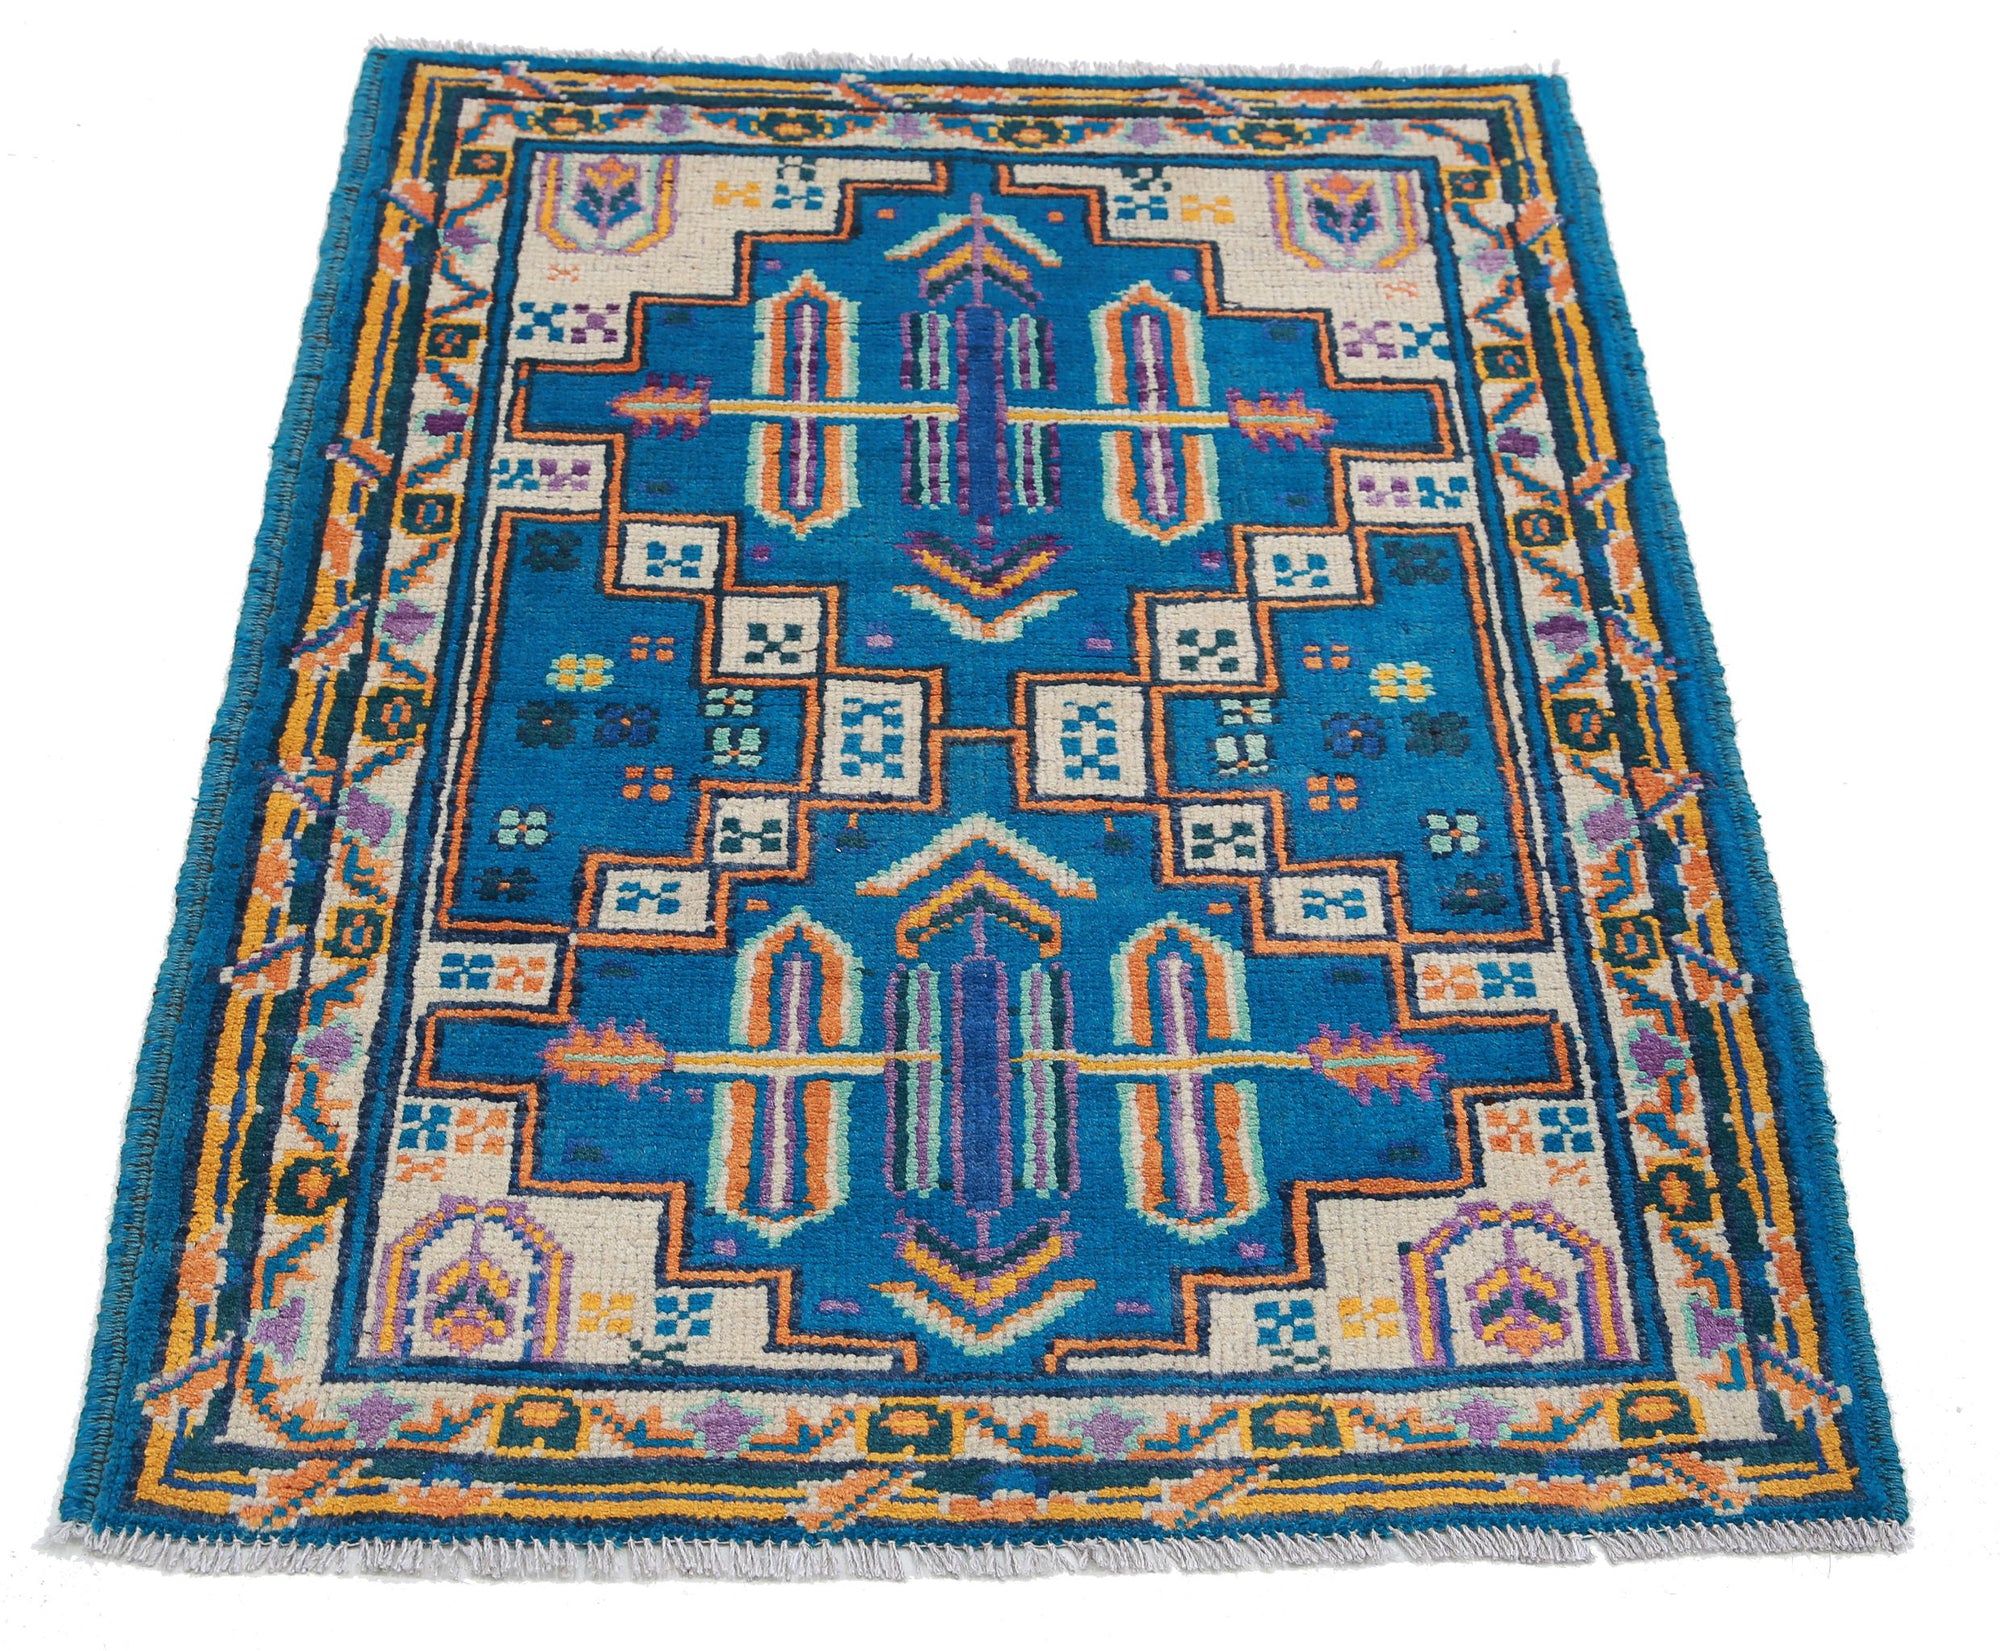 Revival-hand-knotted-qarghani-wool-rug-5014016-3.jpg